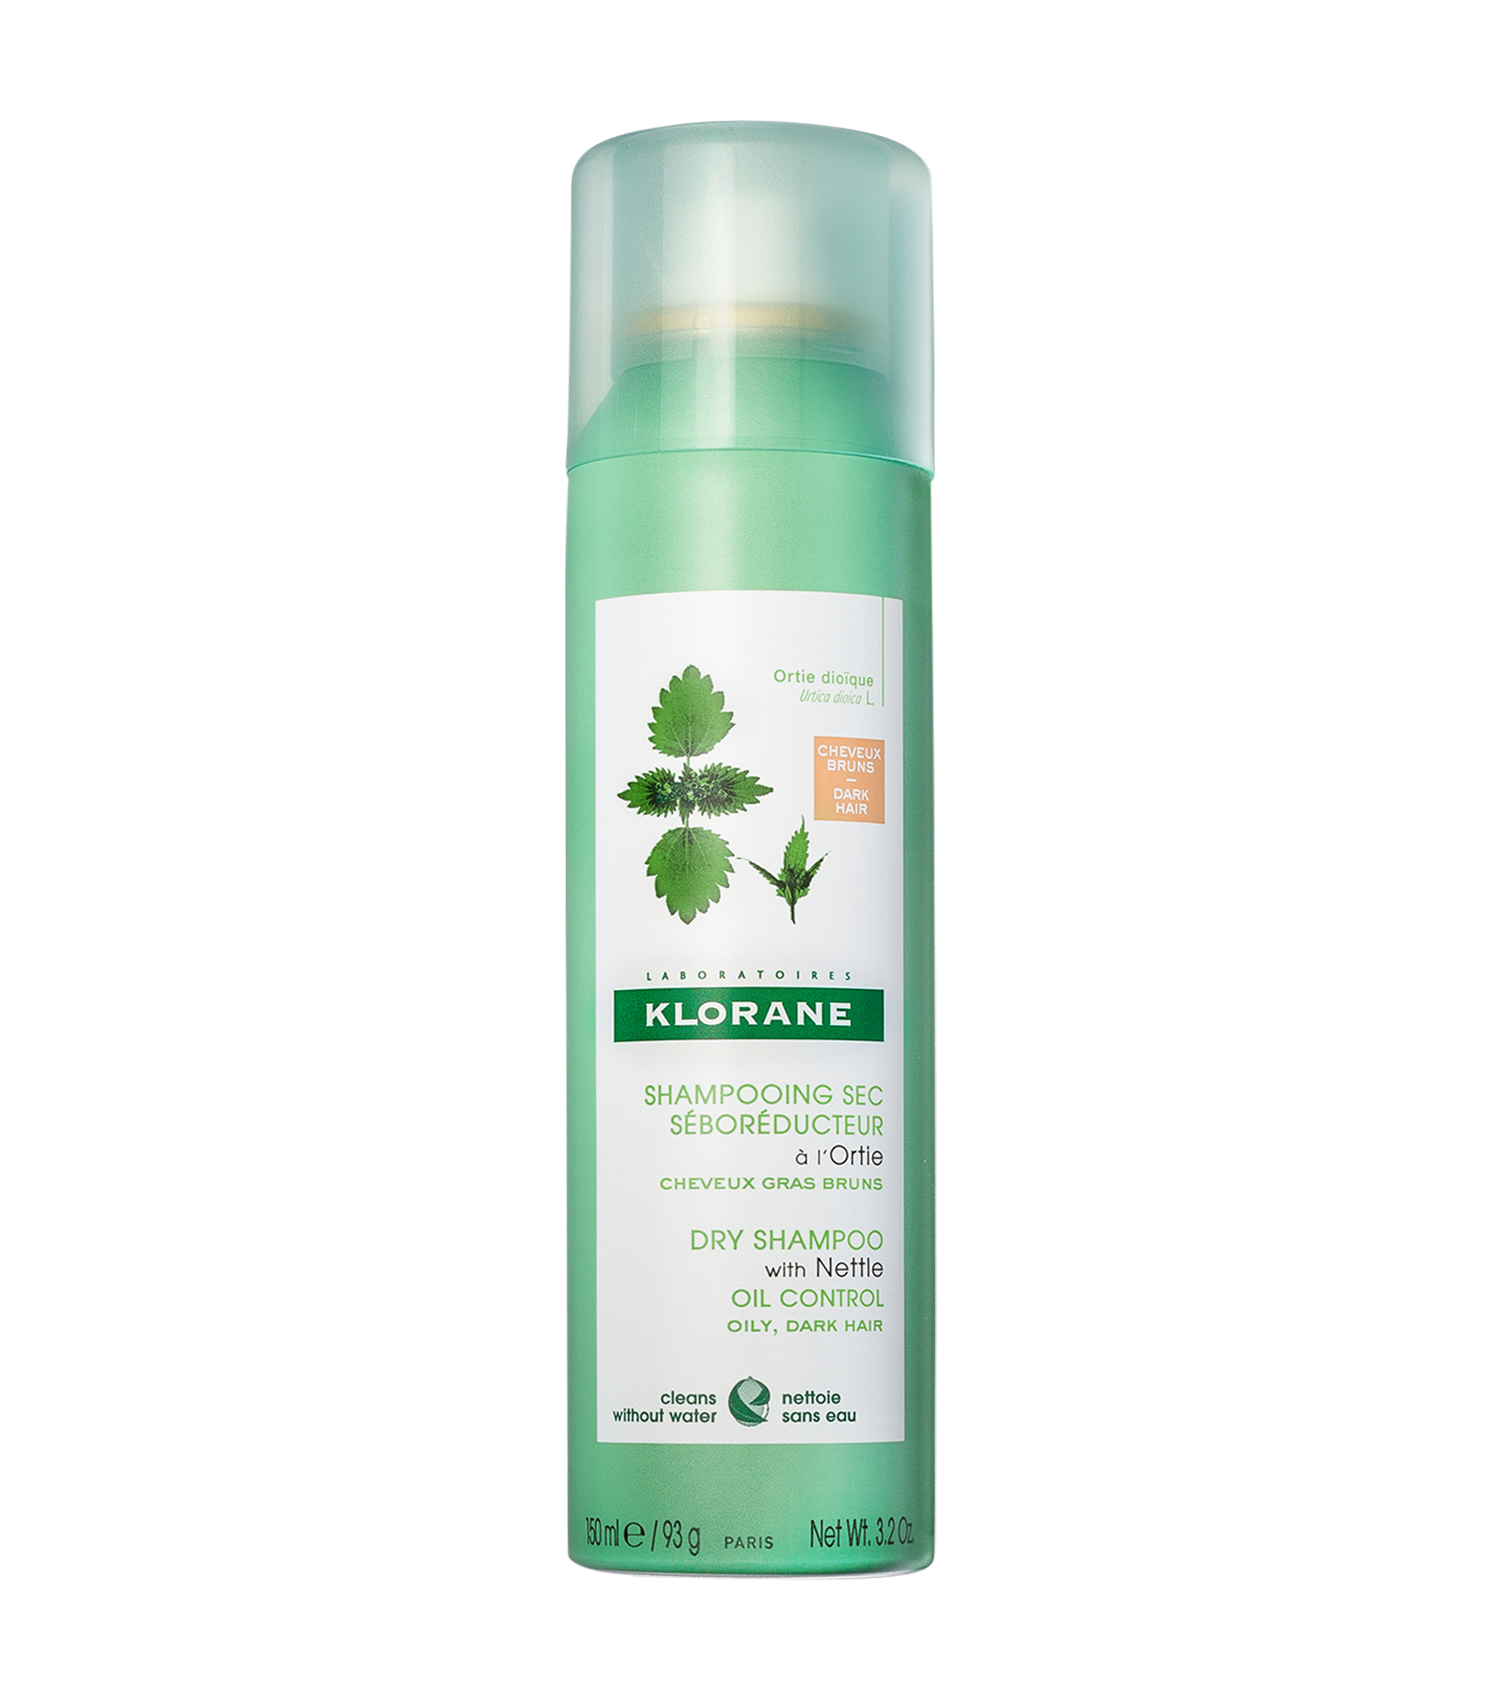 Klorane Dry Shampoo with Nettle - Natural Tint Dry Shampoo with Nettle - Natural Tint - Deluxe 1